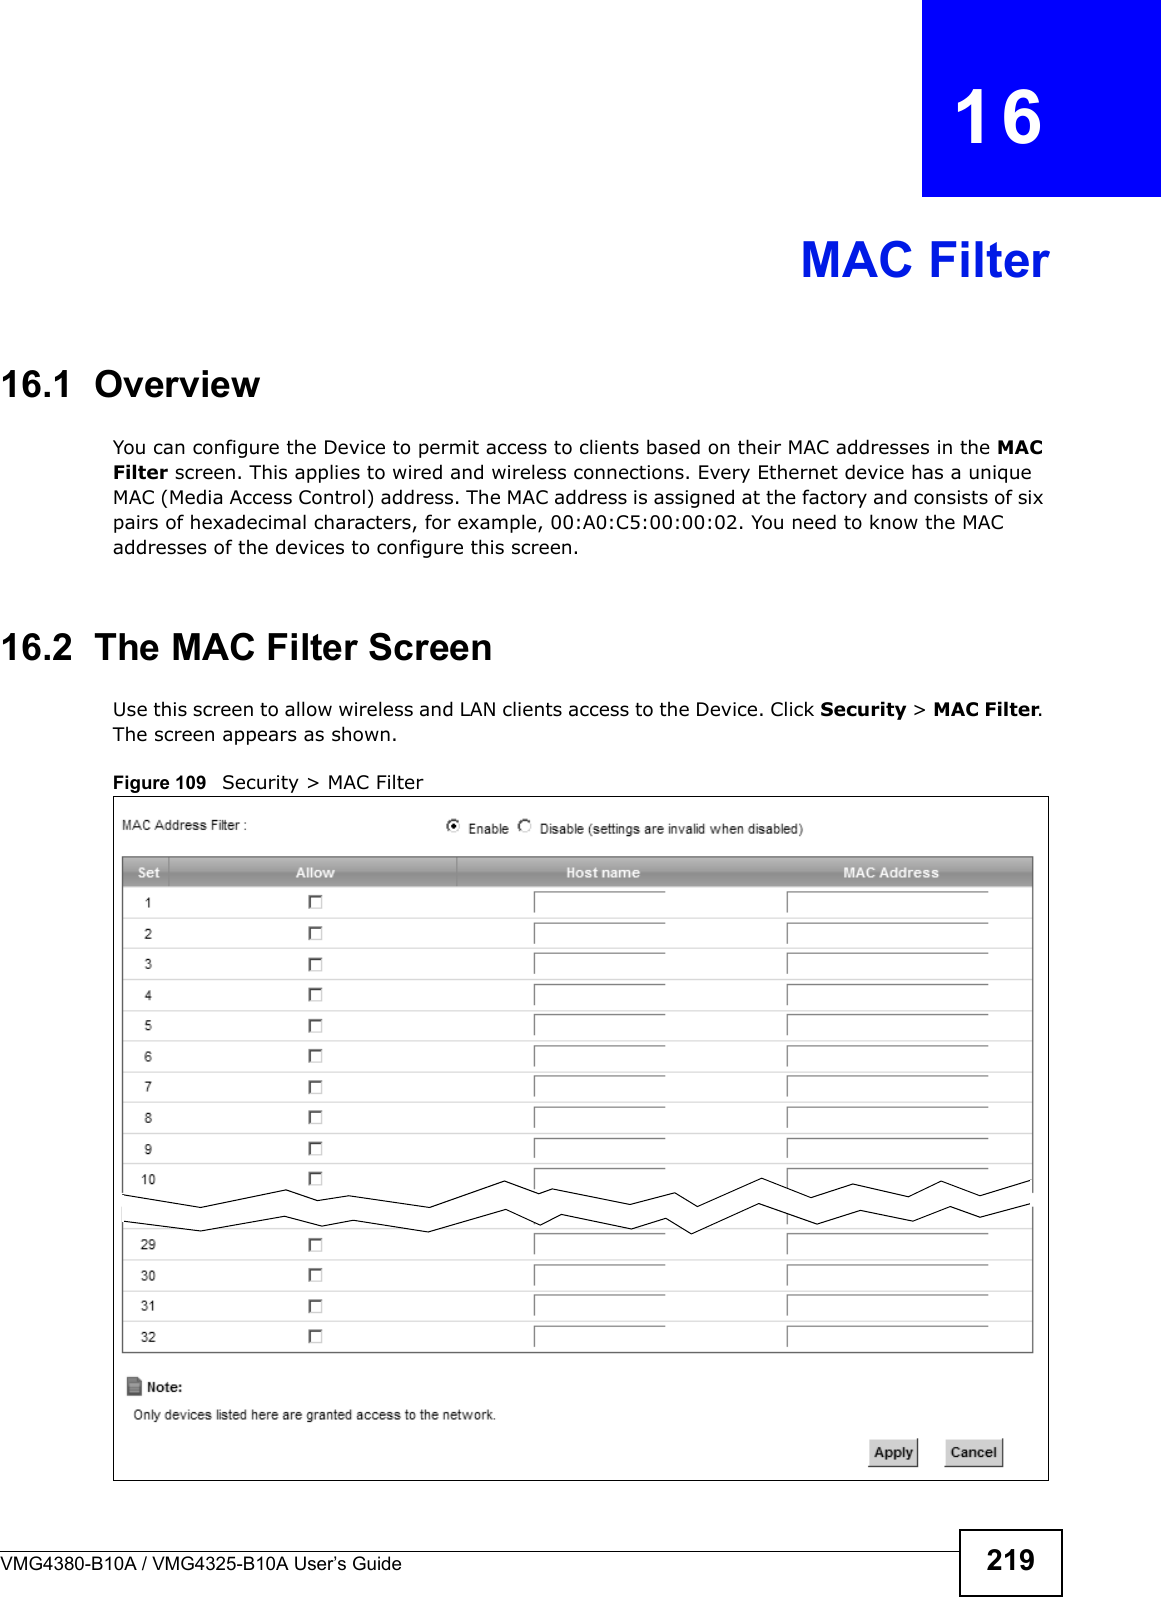 VMG4380-B10A / VMG4325-B10A User’s Guide 219CHAPTER  16MAC Filter16.1  Overview You can configure the Device to permit access to clients based on their MAC addresses in the MAC Filter screen. This applies to wired and wireless connections. Every Ethernet device has a uniqueMAC (Media Access Control) address. The MAC address is assigned at the factory and consists of six pairs of hexadecimal characters, for example, 00:A0:C5:00:00:02. You need to know the MAC addresses of the devices to configure this screen.16.2  The MAC Filter ScreenUse this screen to allow wireless and LAN clients access to the Device. Click Security &gt; MAC Filter. The screen appears as shown.Figure 109   Security &gt; MAC Filter